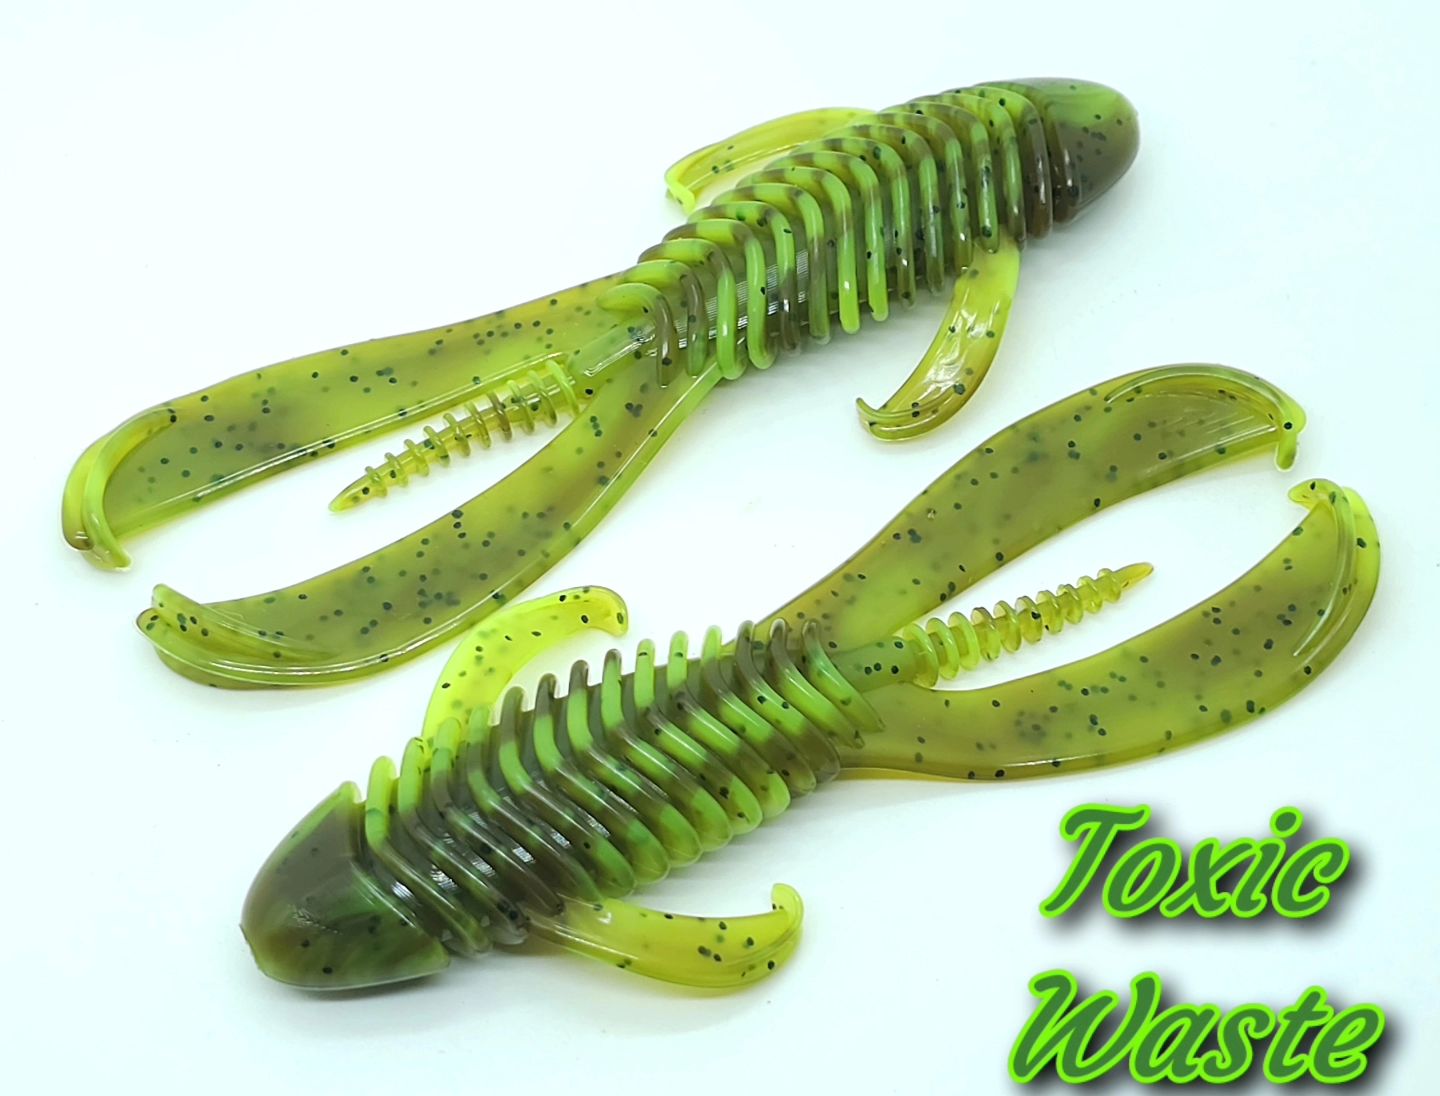 CR-3 Creature Toxic Waste